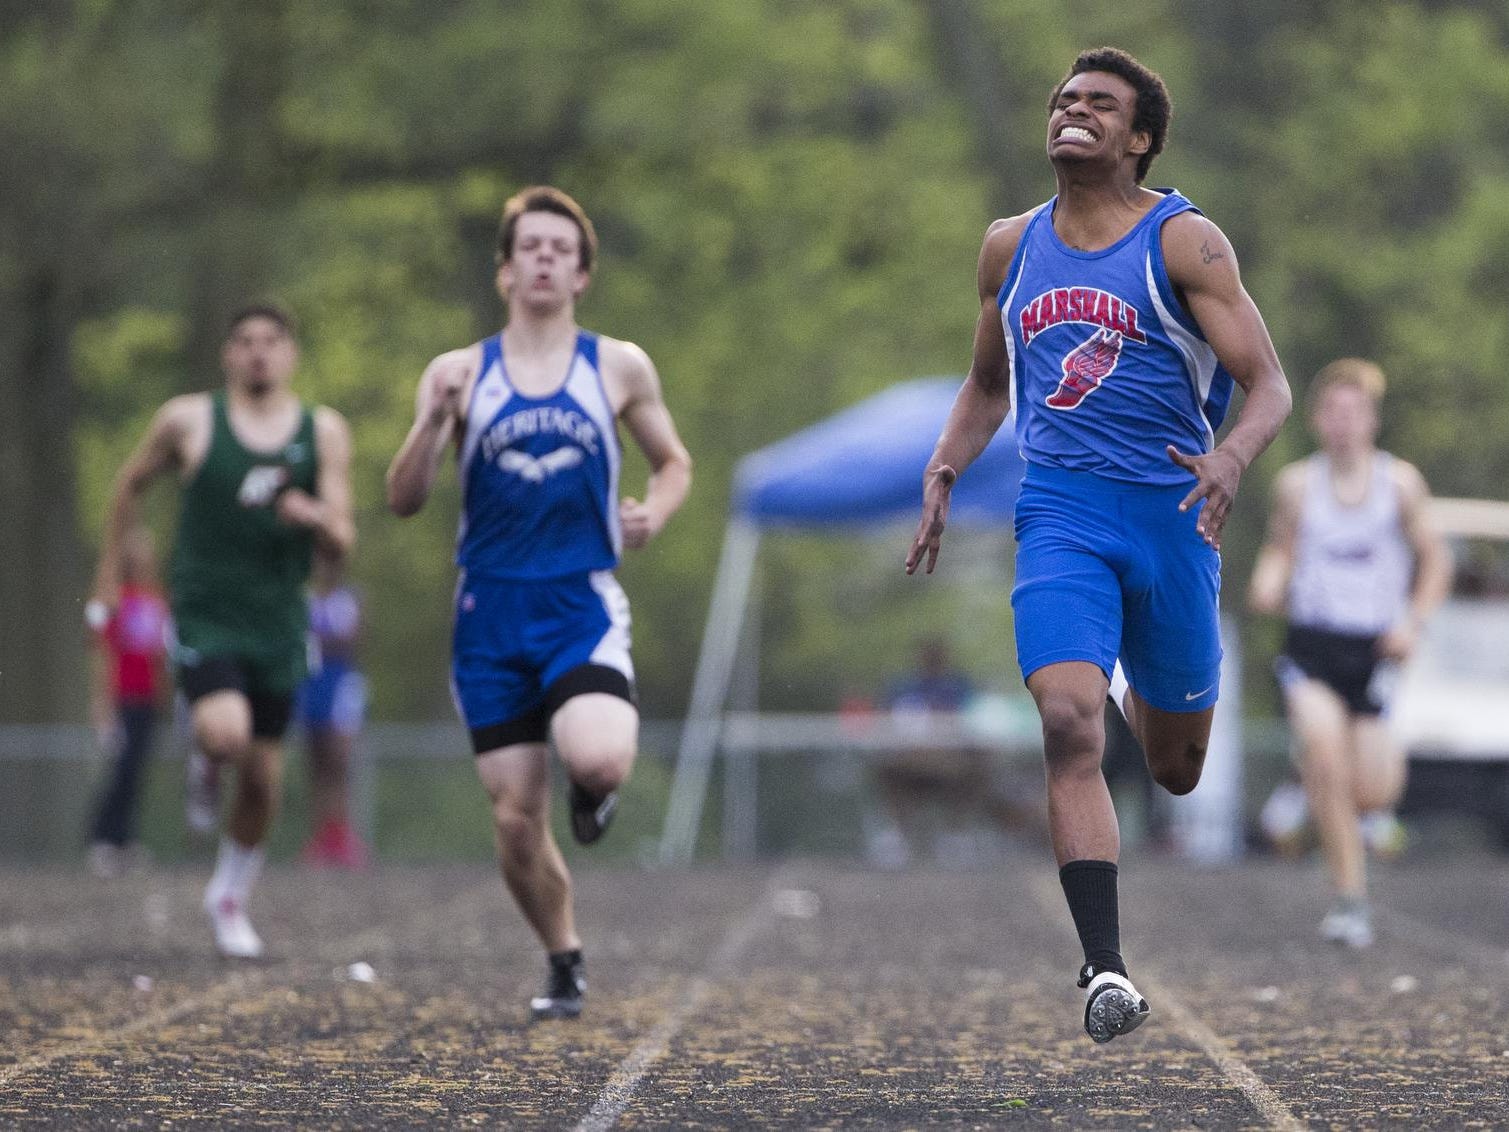 Stoney Prowell (front), a senior at John Marshall, easily wins the boy's 400 meter run, at Arsenal Tech High School, Indianapolis, Friday, May 8, 2015.